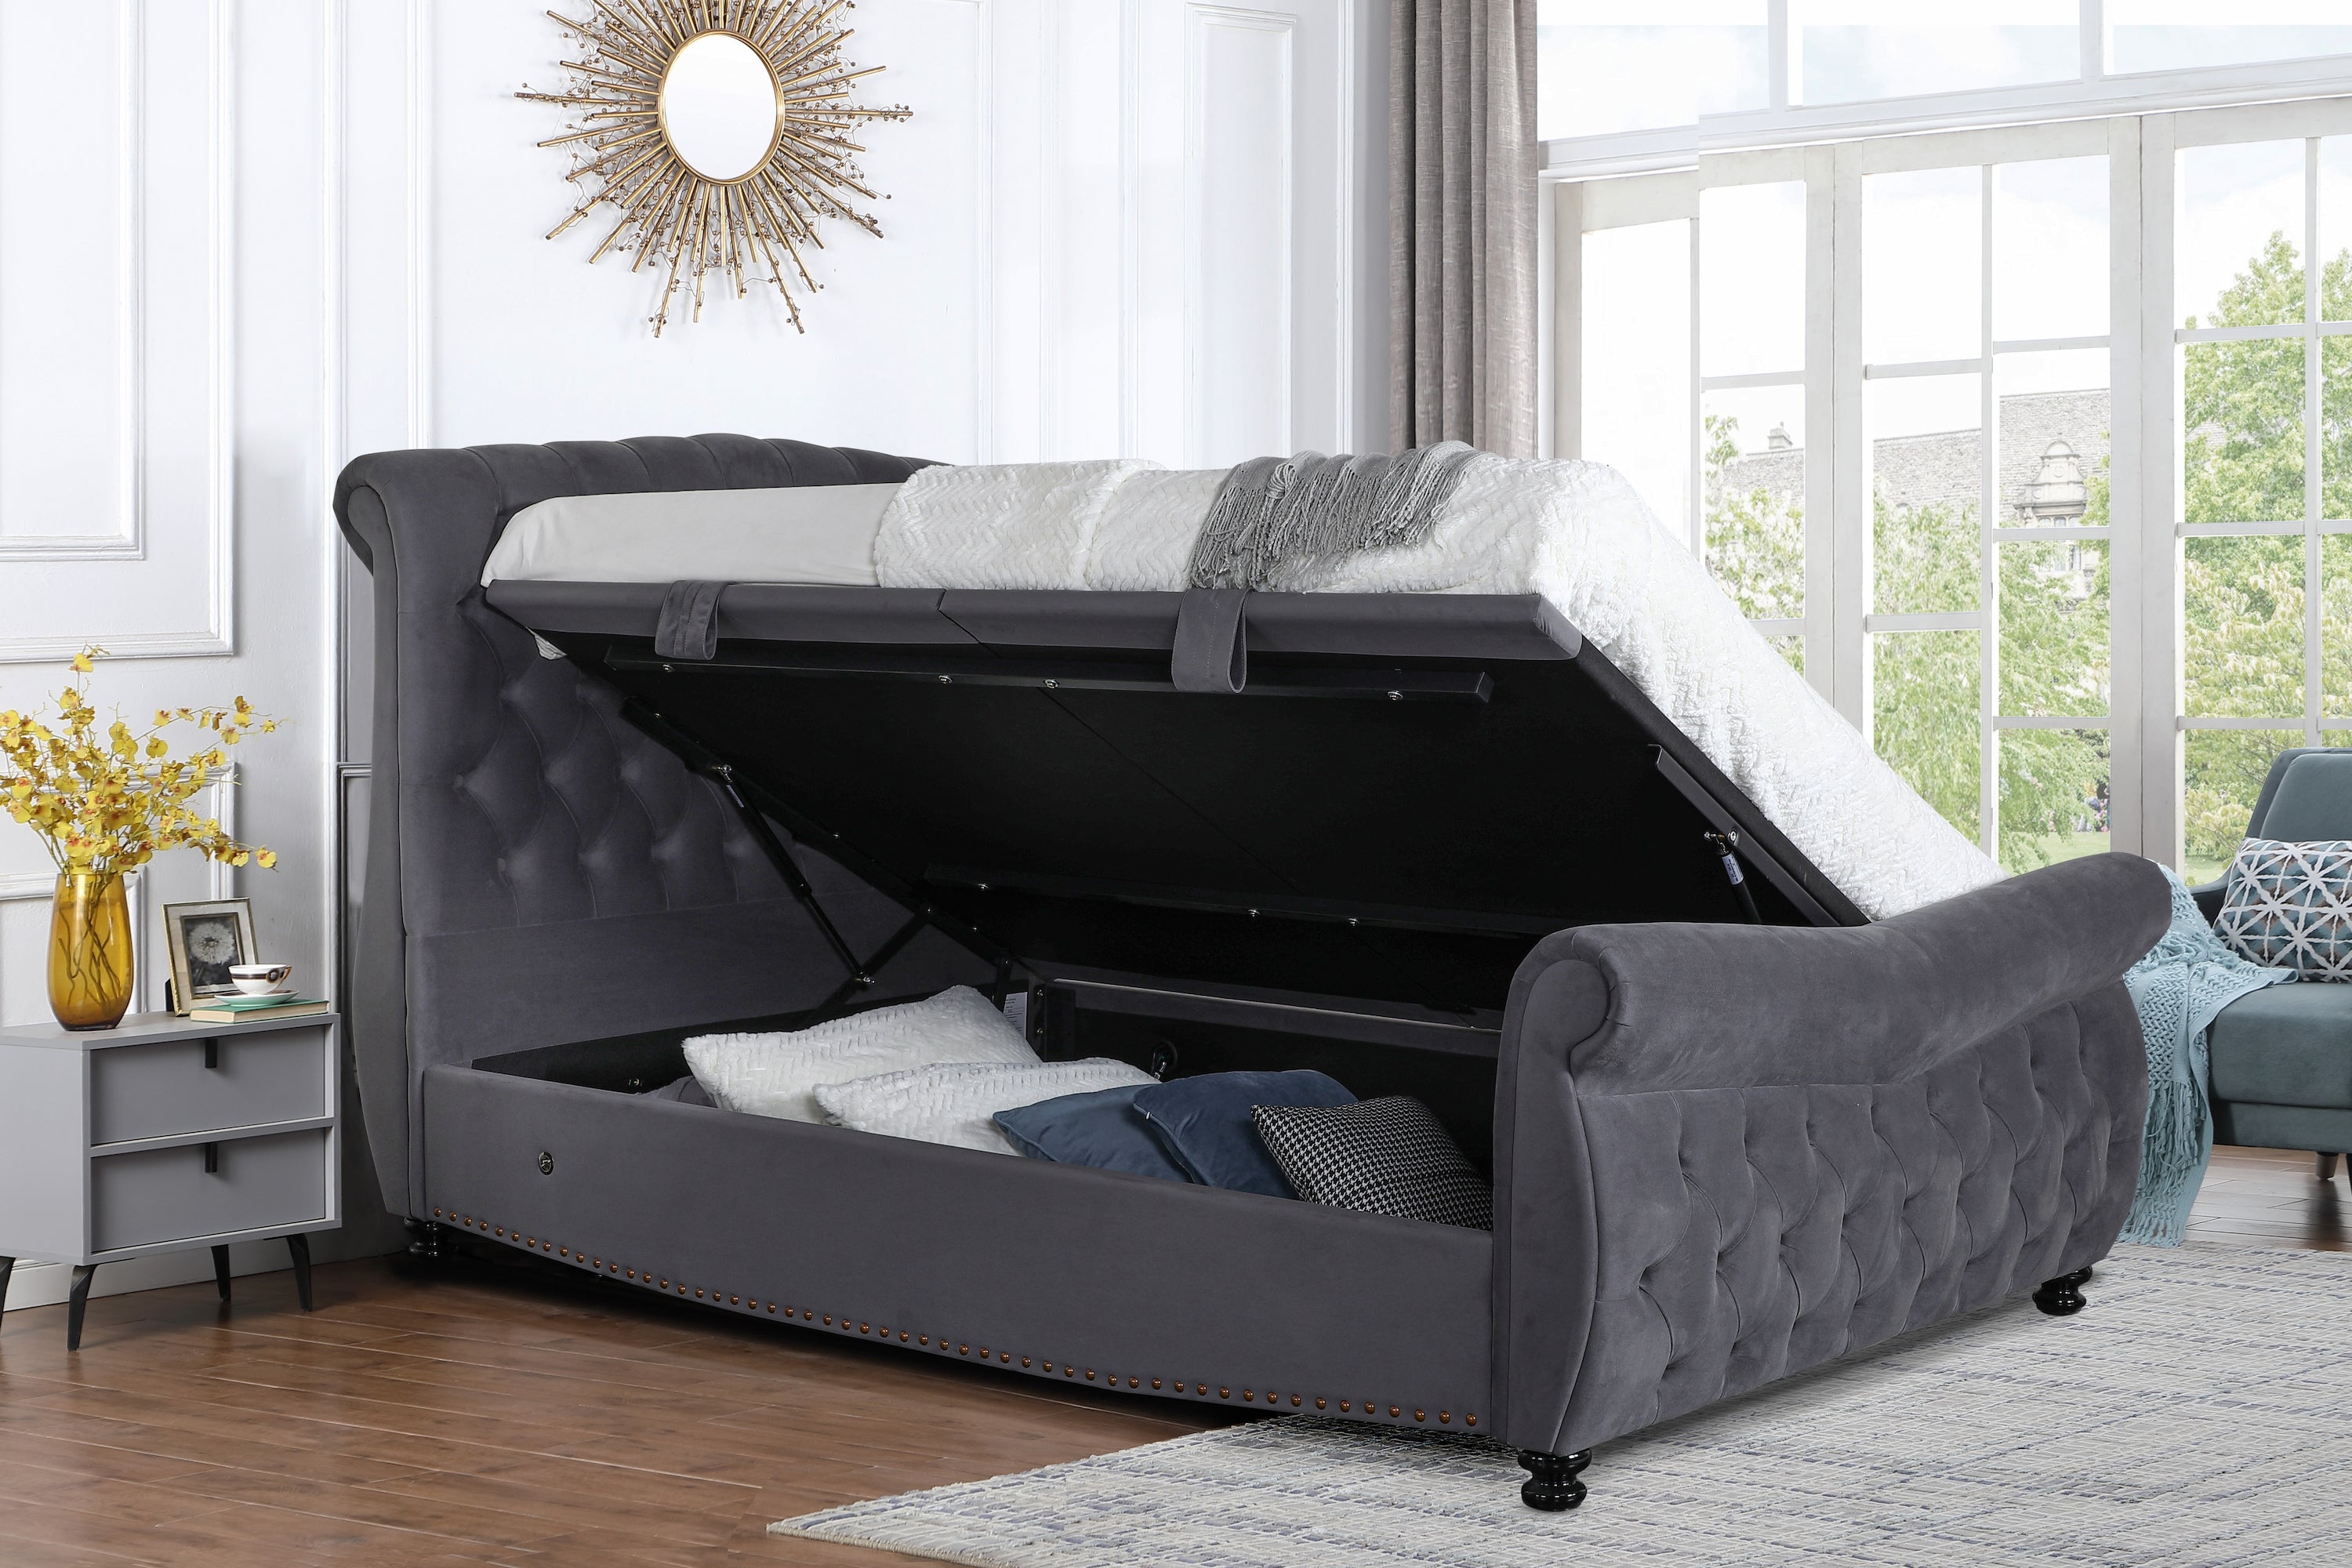 Belgravia Side Opening Ottoman Bed Frame